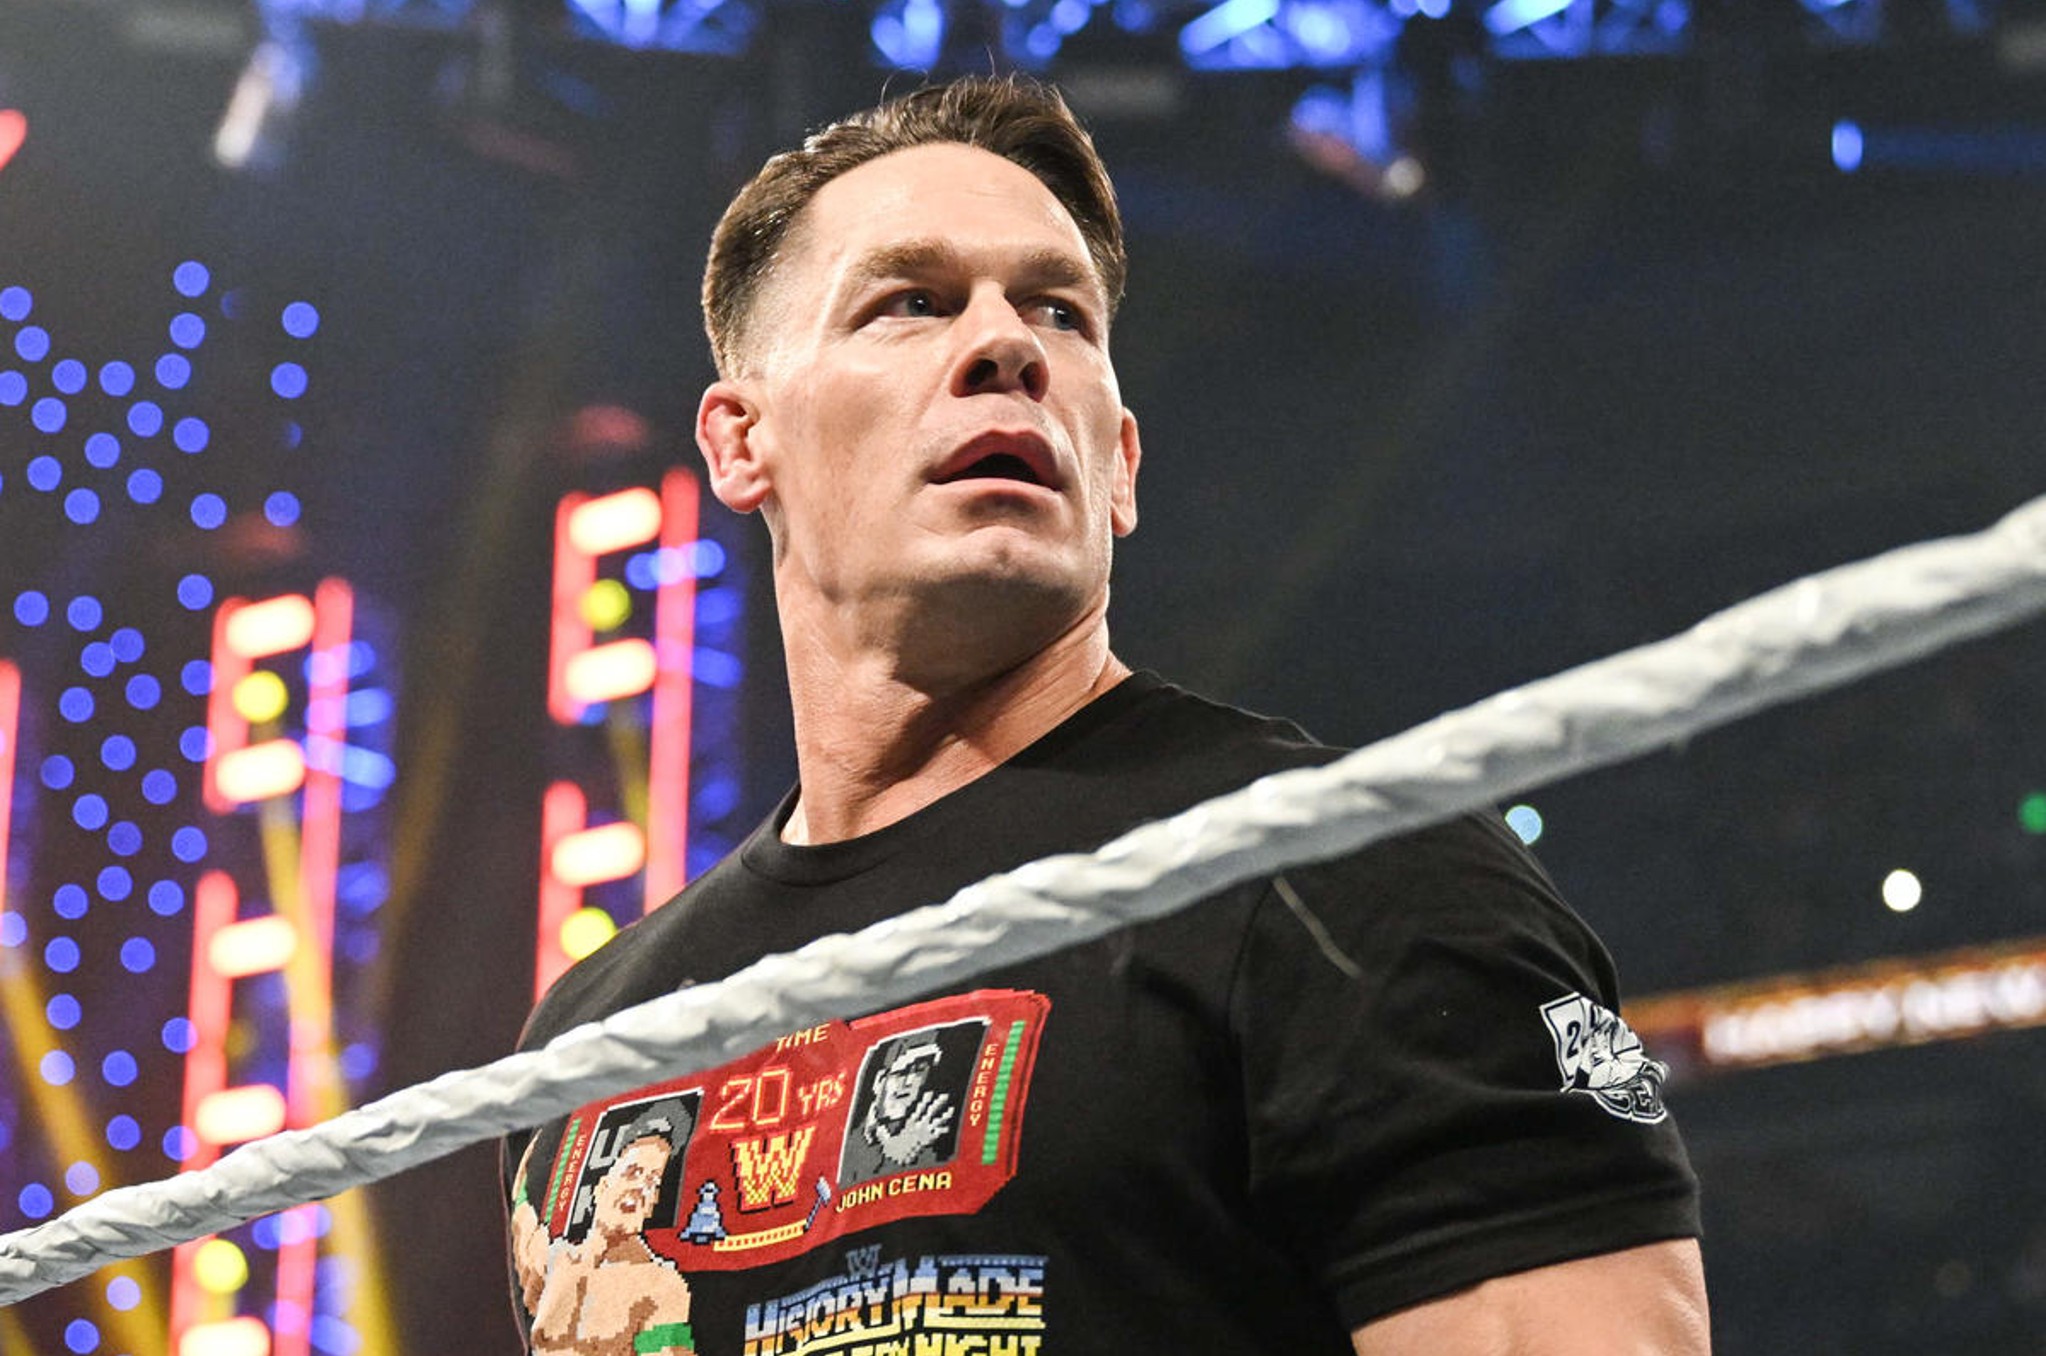 WWE confirms John Cena will return to Raw just weeks before WrestleMania amid rumours of huge match